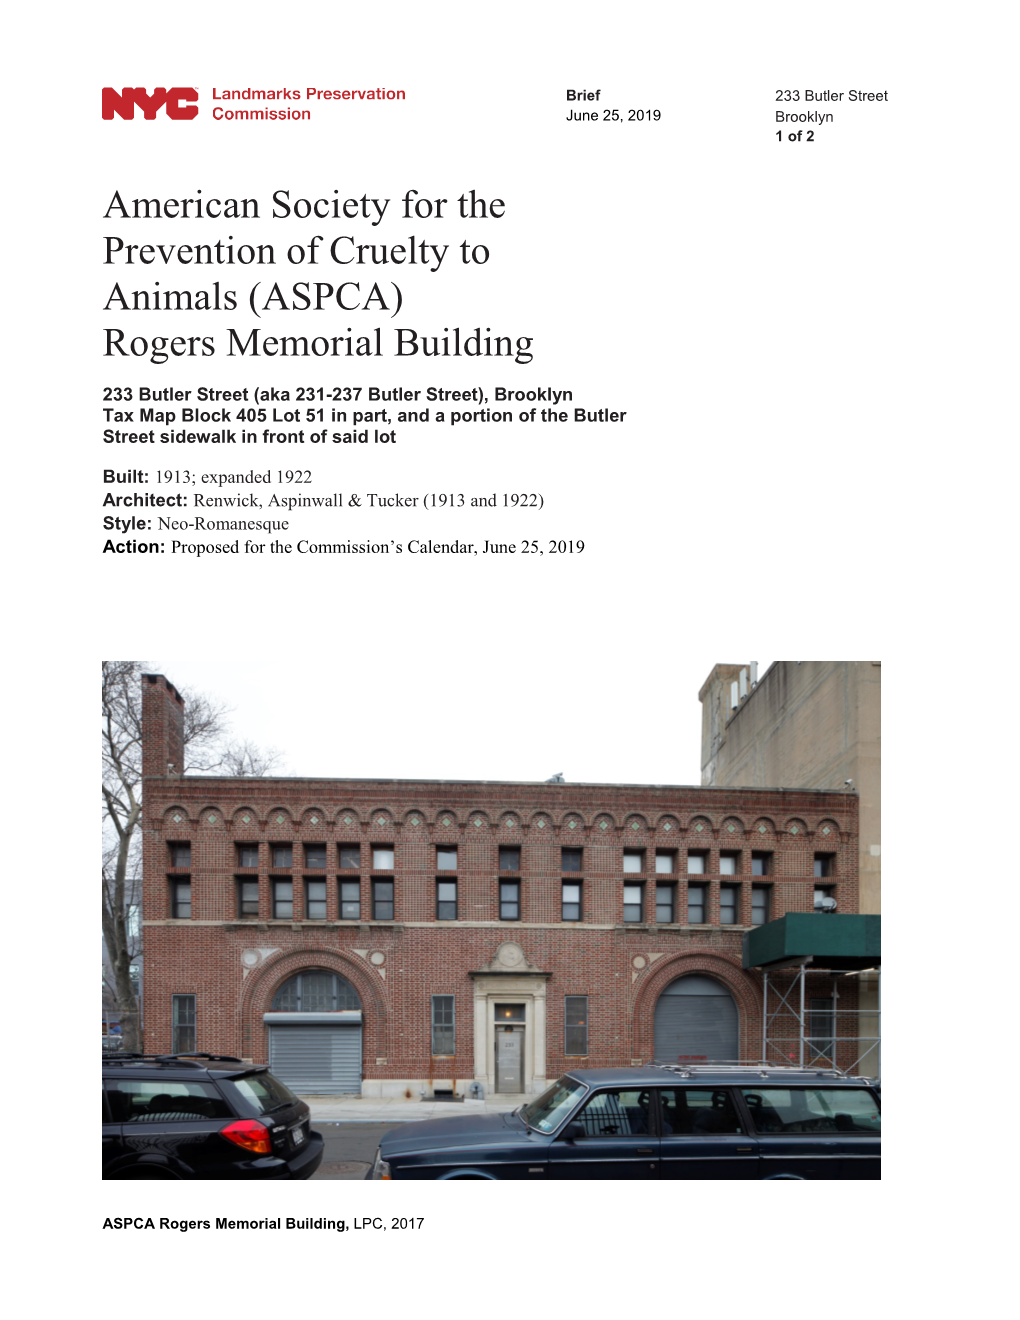 American Society for the Prevention of Cruelty to Animals (ASPCA) Rogers Memorial Building